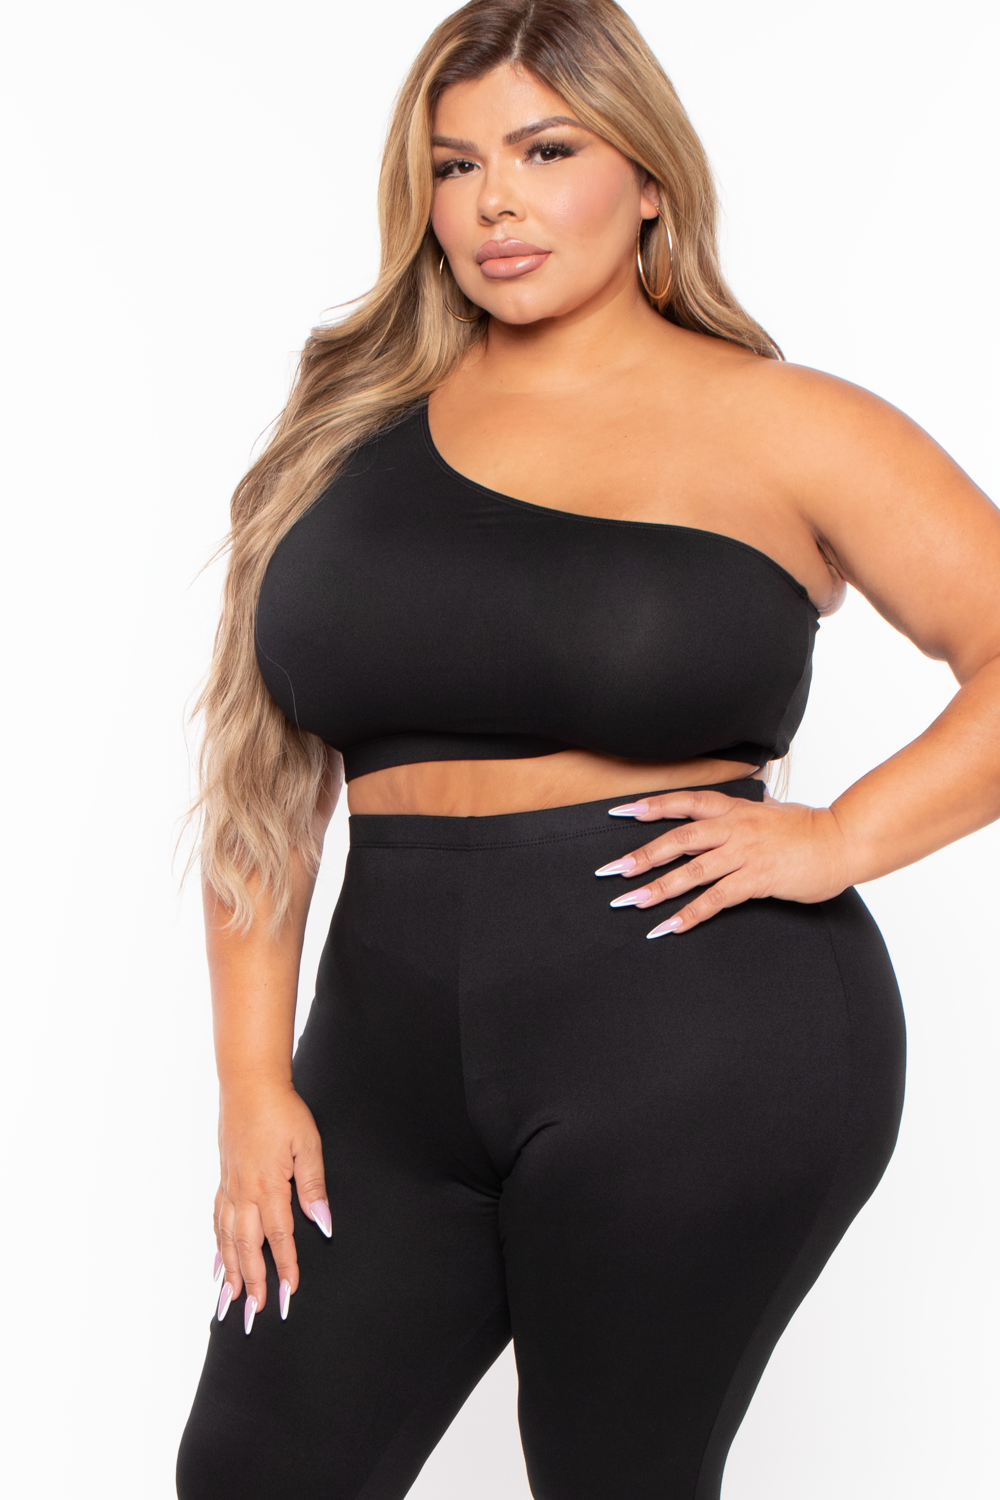 Women's Casual Unbalance Top And Matching Leggings Sets Plus Size Curvy 1X  2X 3X 